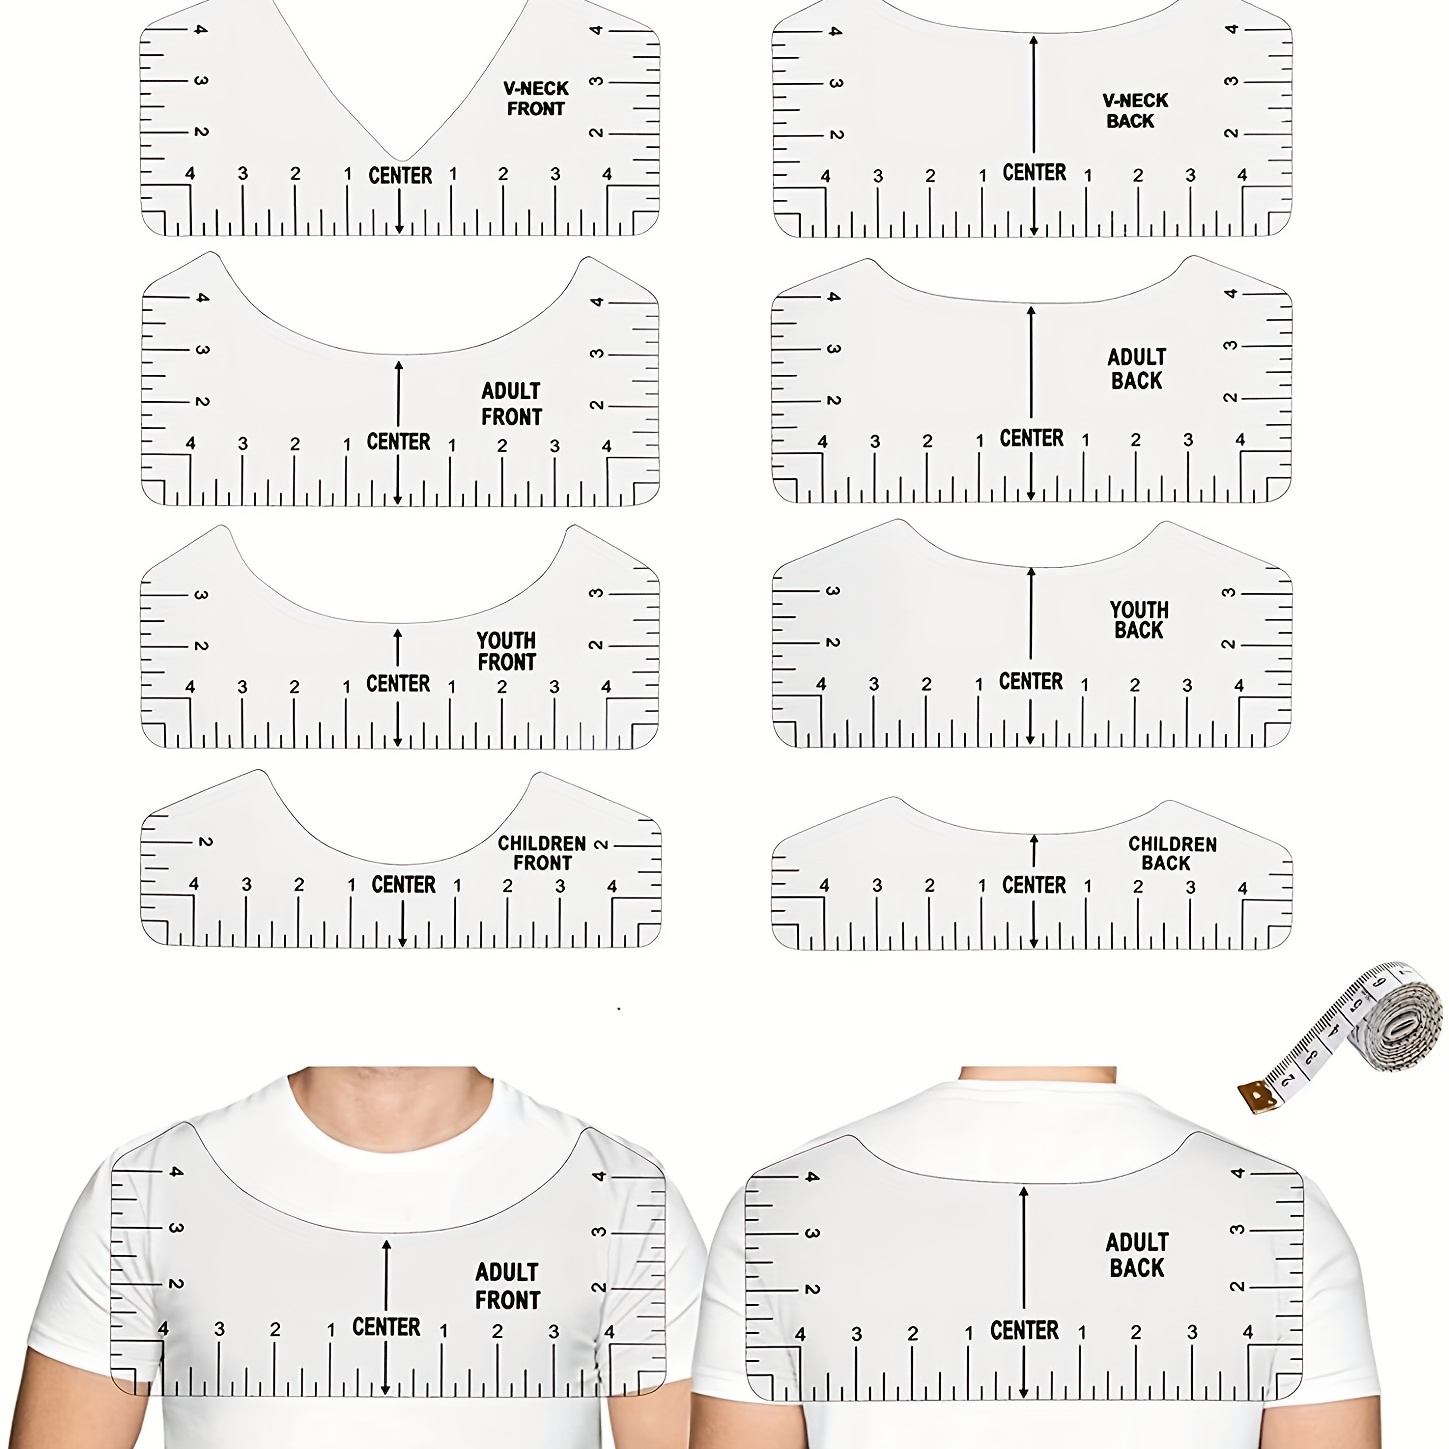  A Tshirt Ruler Guide For Vinyl Alignment And